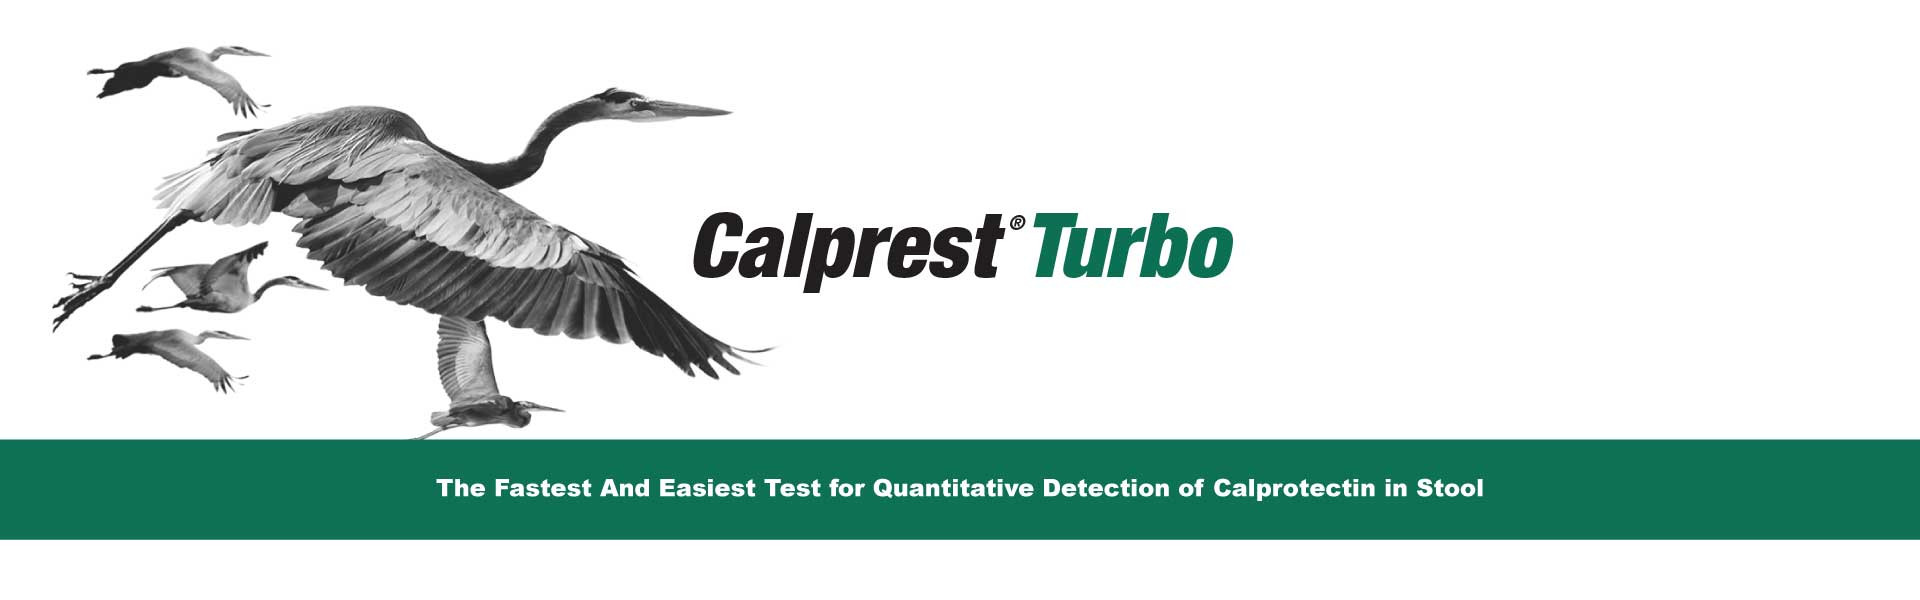 Calprest TURBO is the new approach Eurospital offers to verify, in an accurate and non-invasive way, the presence of an inflammatory state of the intestinal tract.